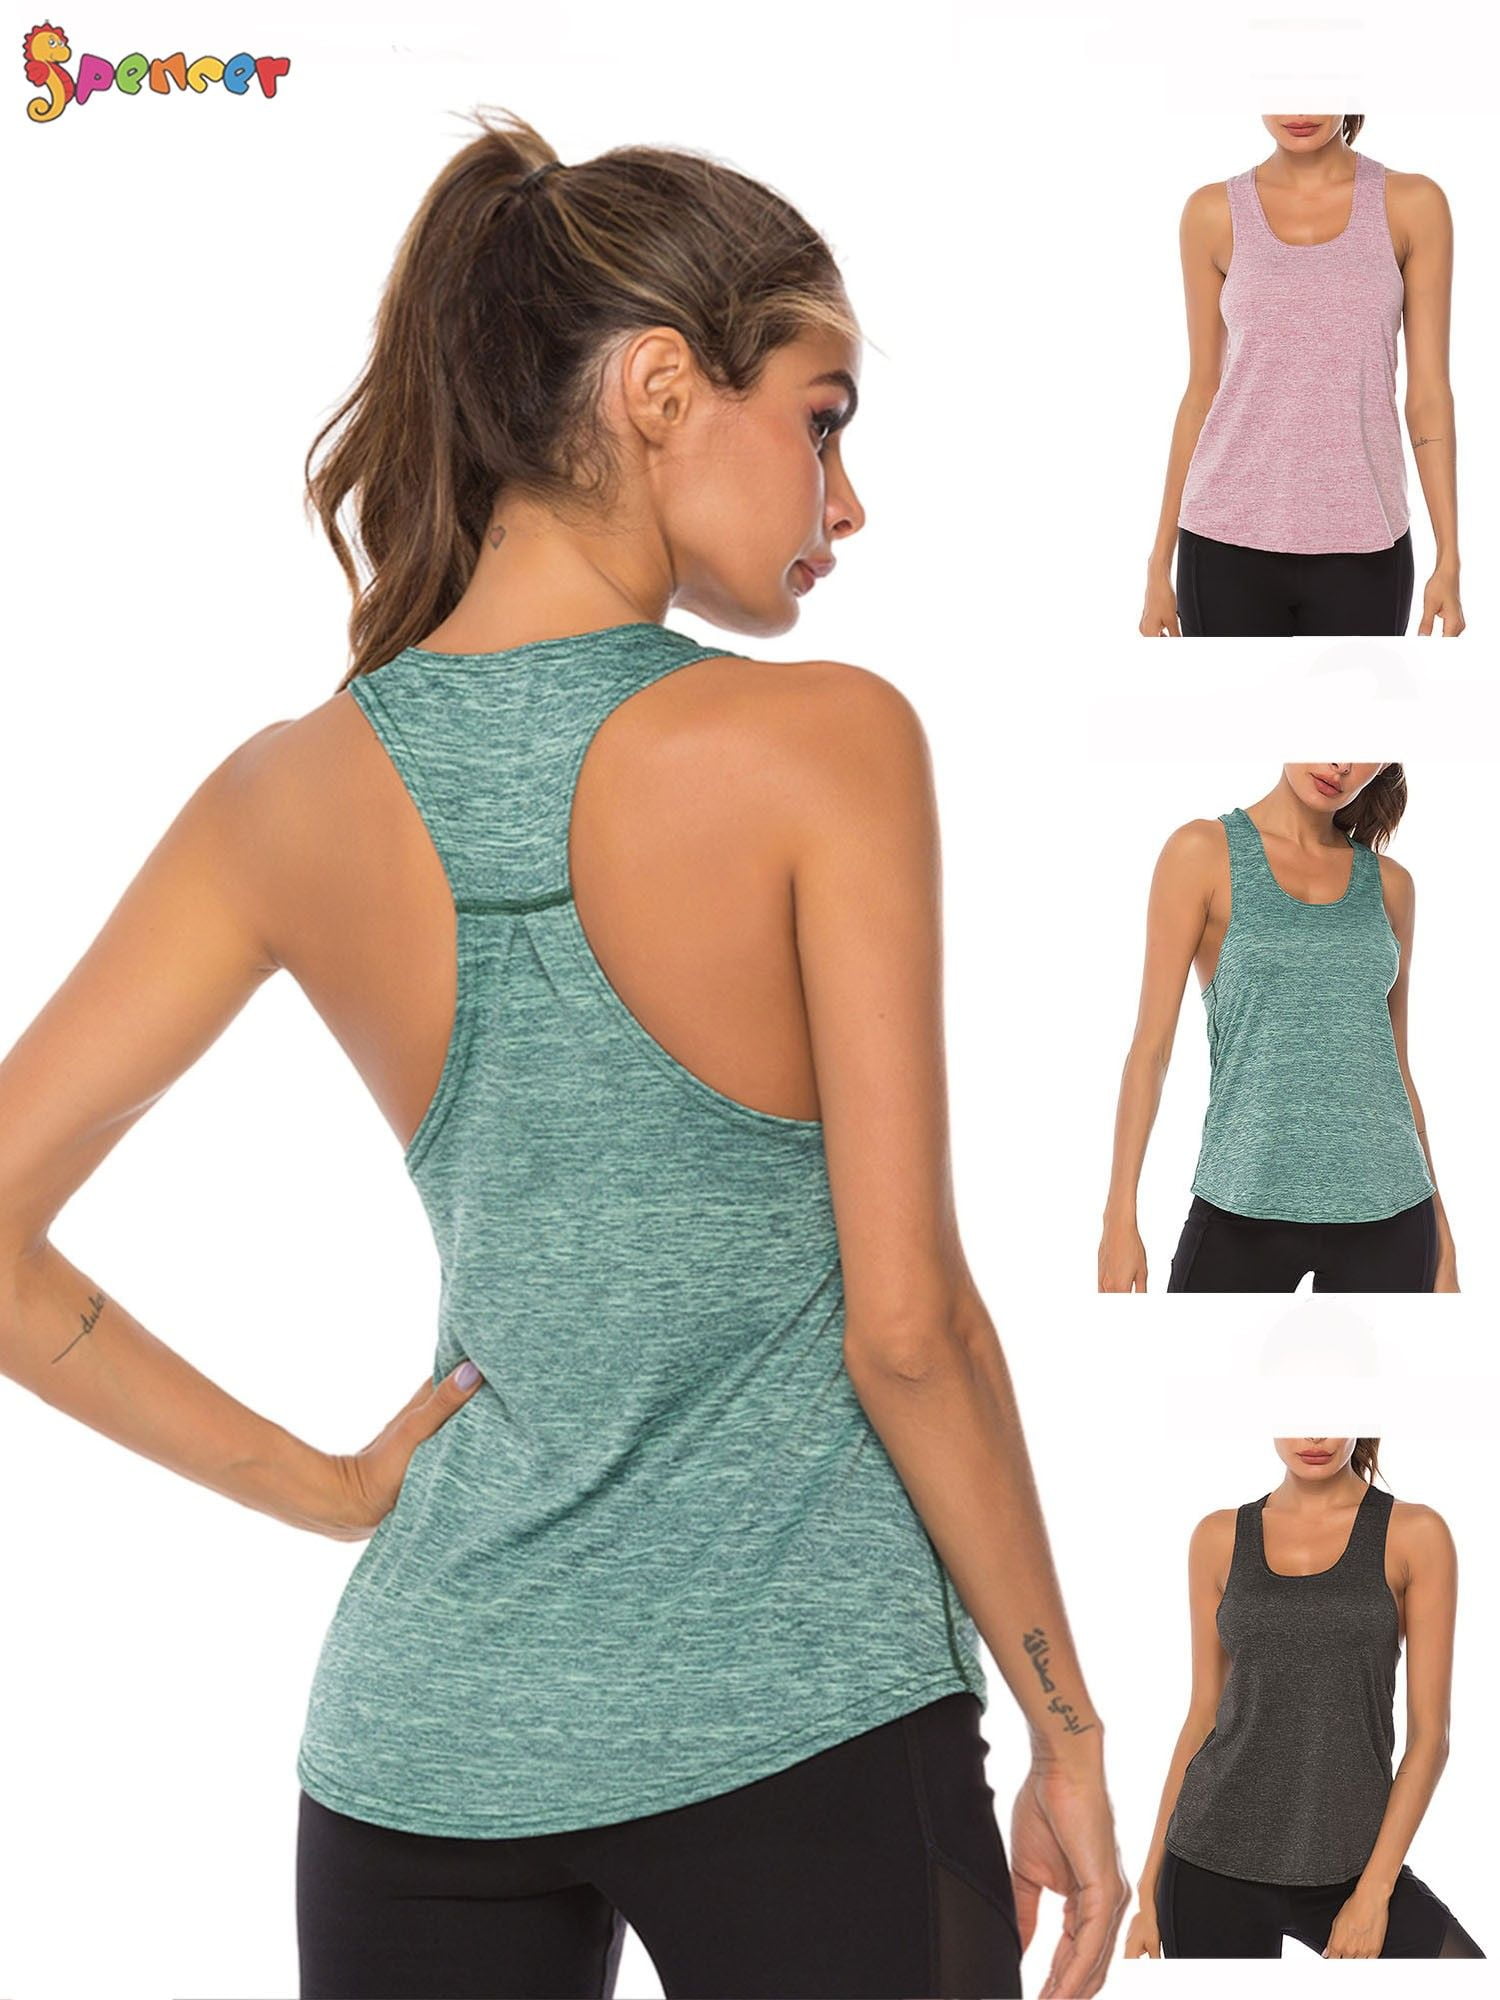 SSDXY Workout Tank Top for Women Athletic Sleeveless Yoga Tops Gym Tee Shirt Exercise Racerback Sports Shirts Blouse 